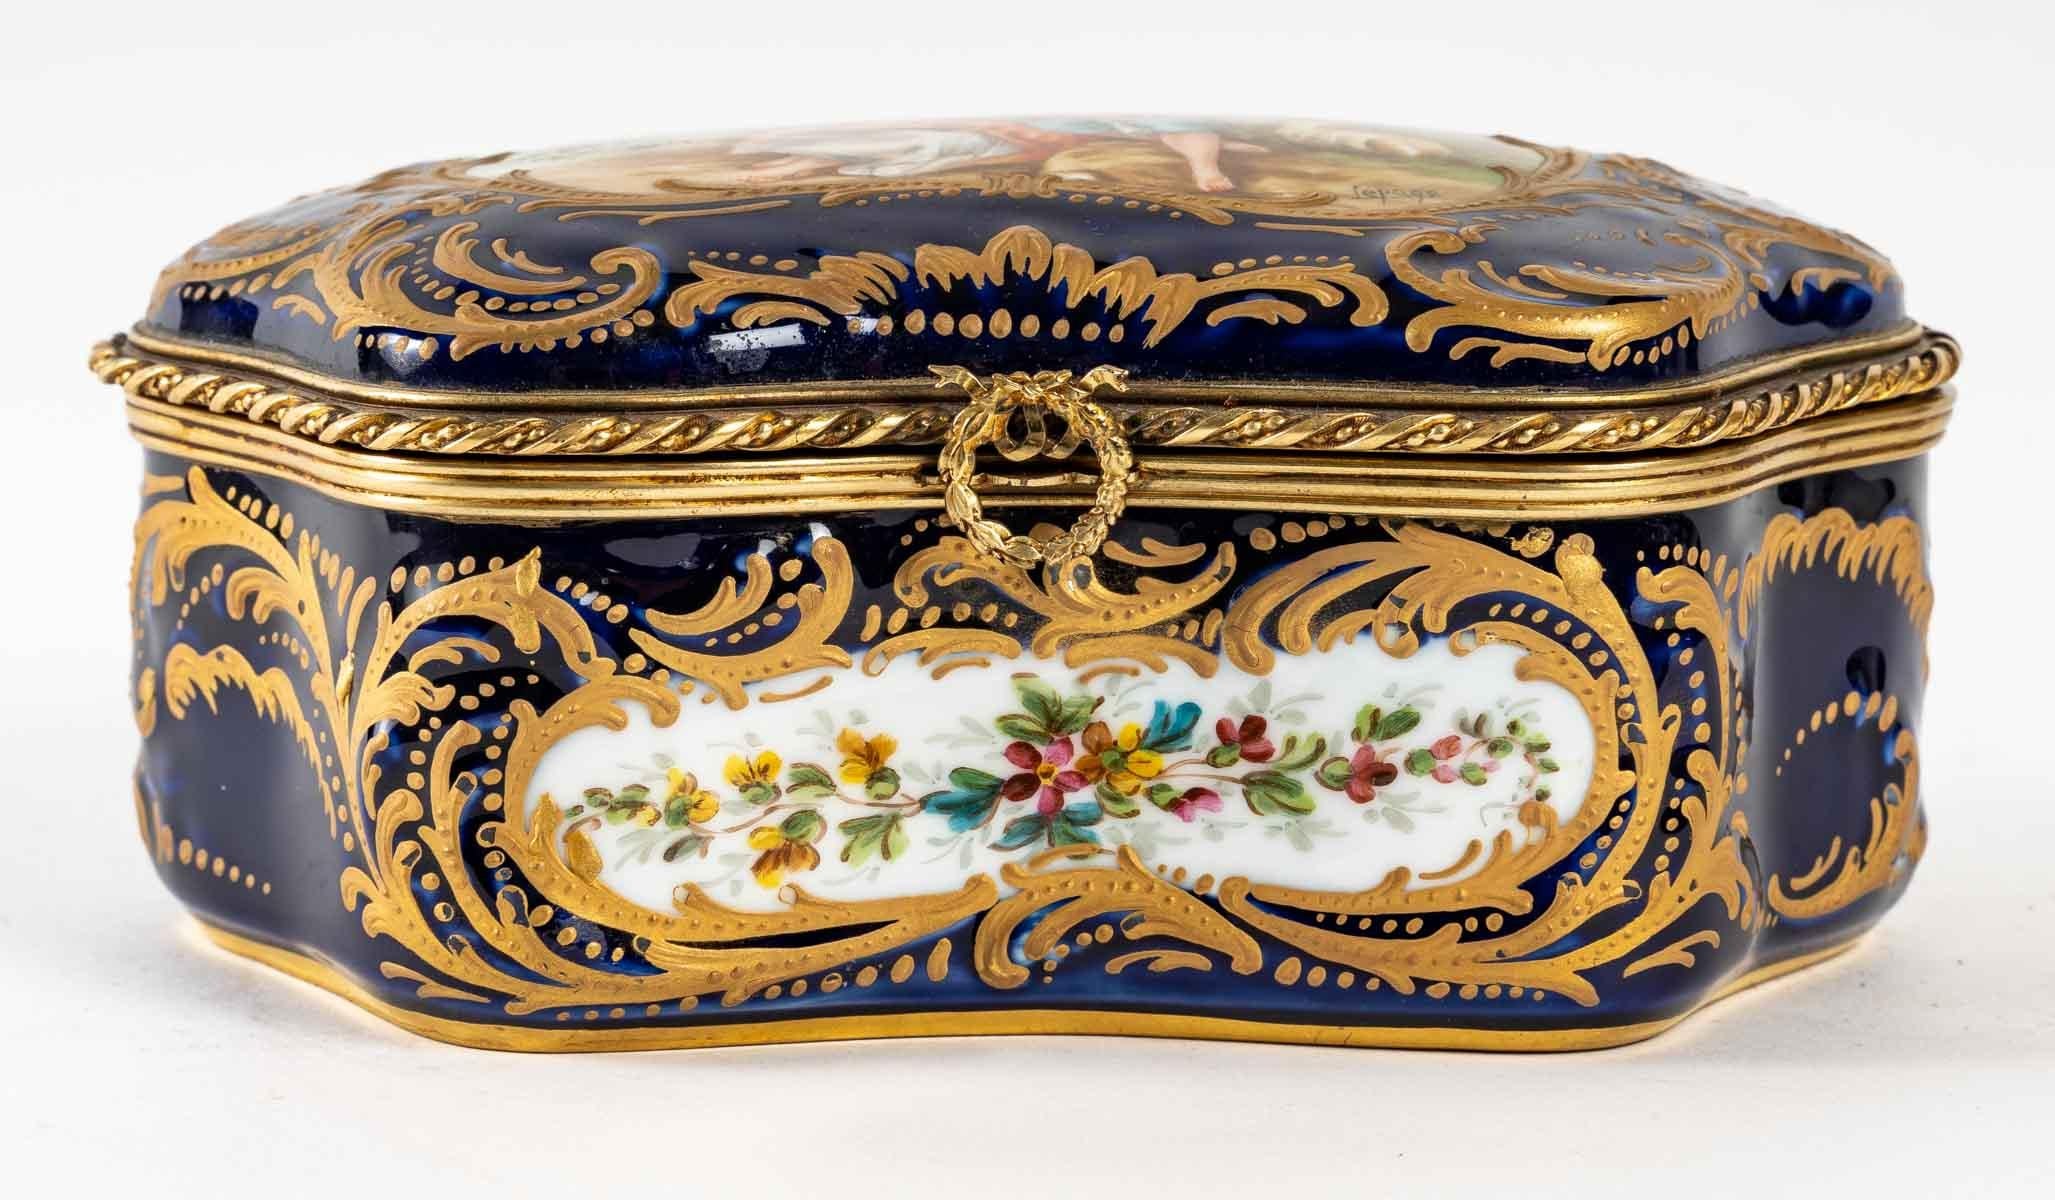 A Sèvres style royal blue porcelain box with a romantic scene of two lovers, early 20th century, Napoleon III style.
Measures: H: 8.5 cm, W: 20 cm, D: 14 cm.